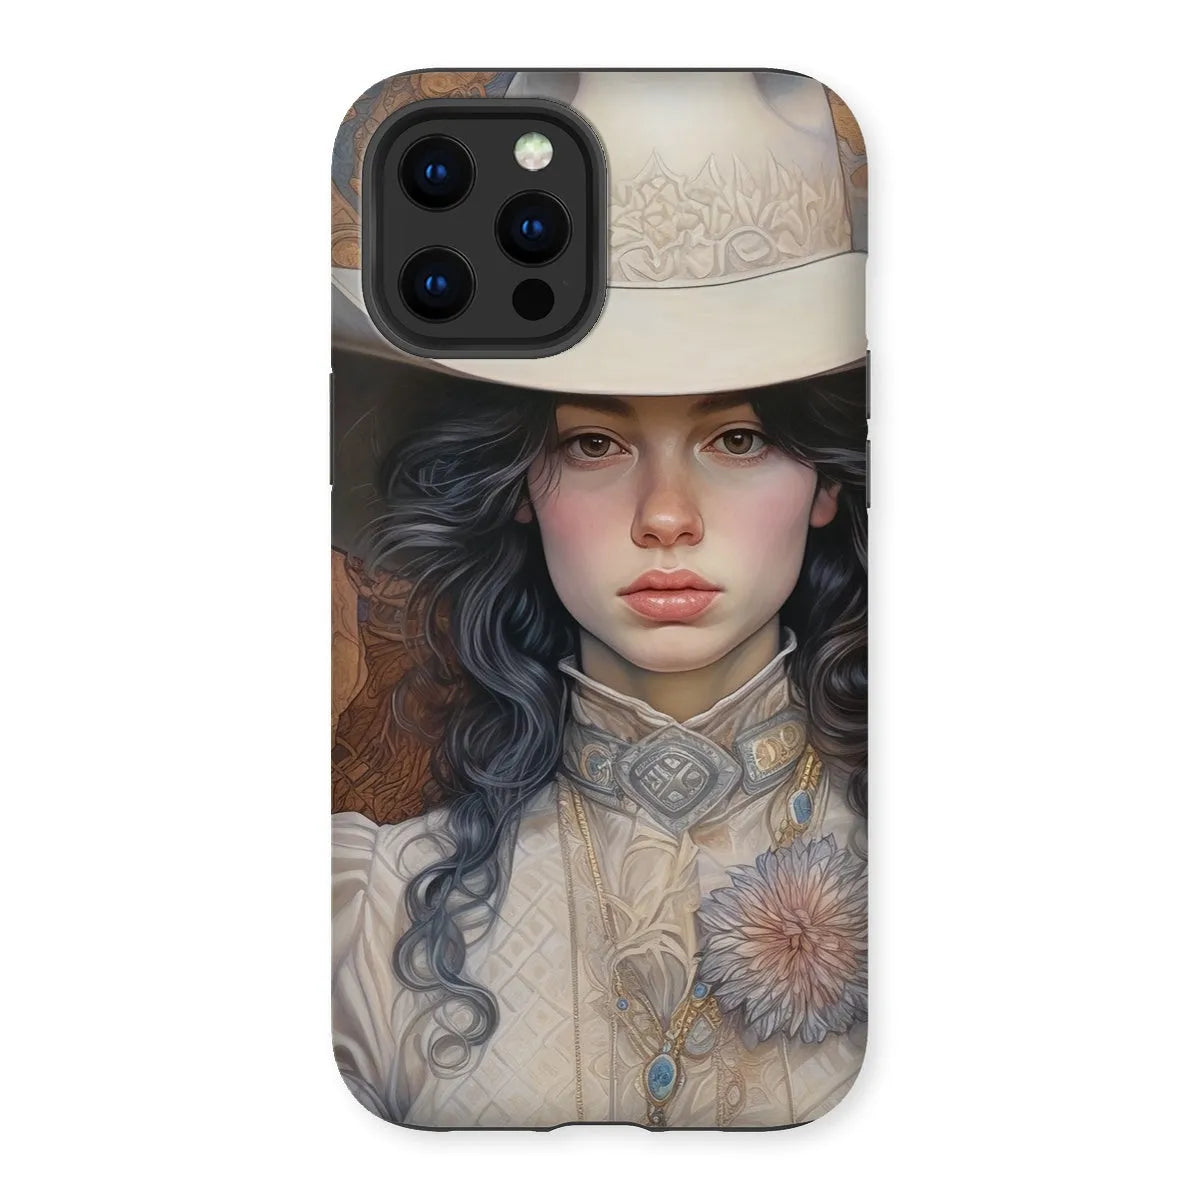 Helena The Lesbian Cowgirl - Sapphic Art Phone Case - Iphone 13 Pro Max / Matte - Mobile Phone Cases - Aesthetic Art